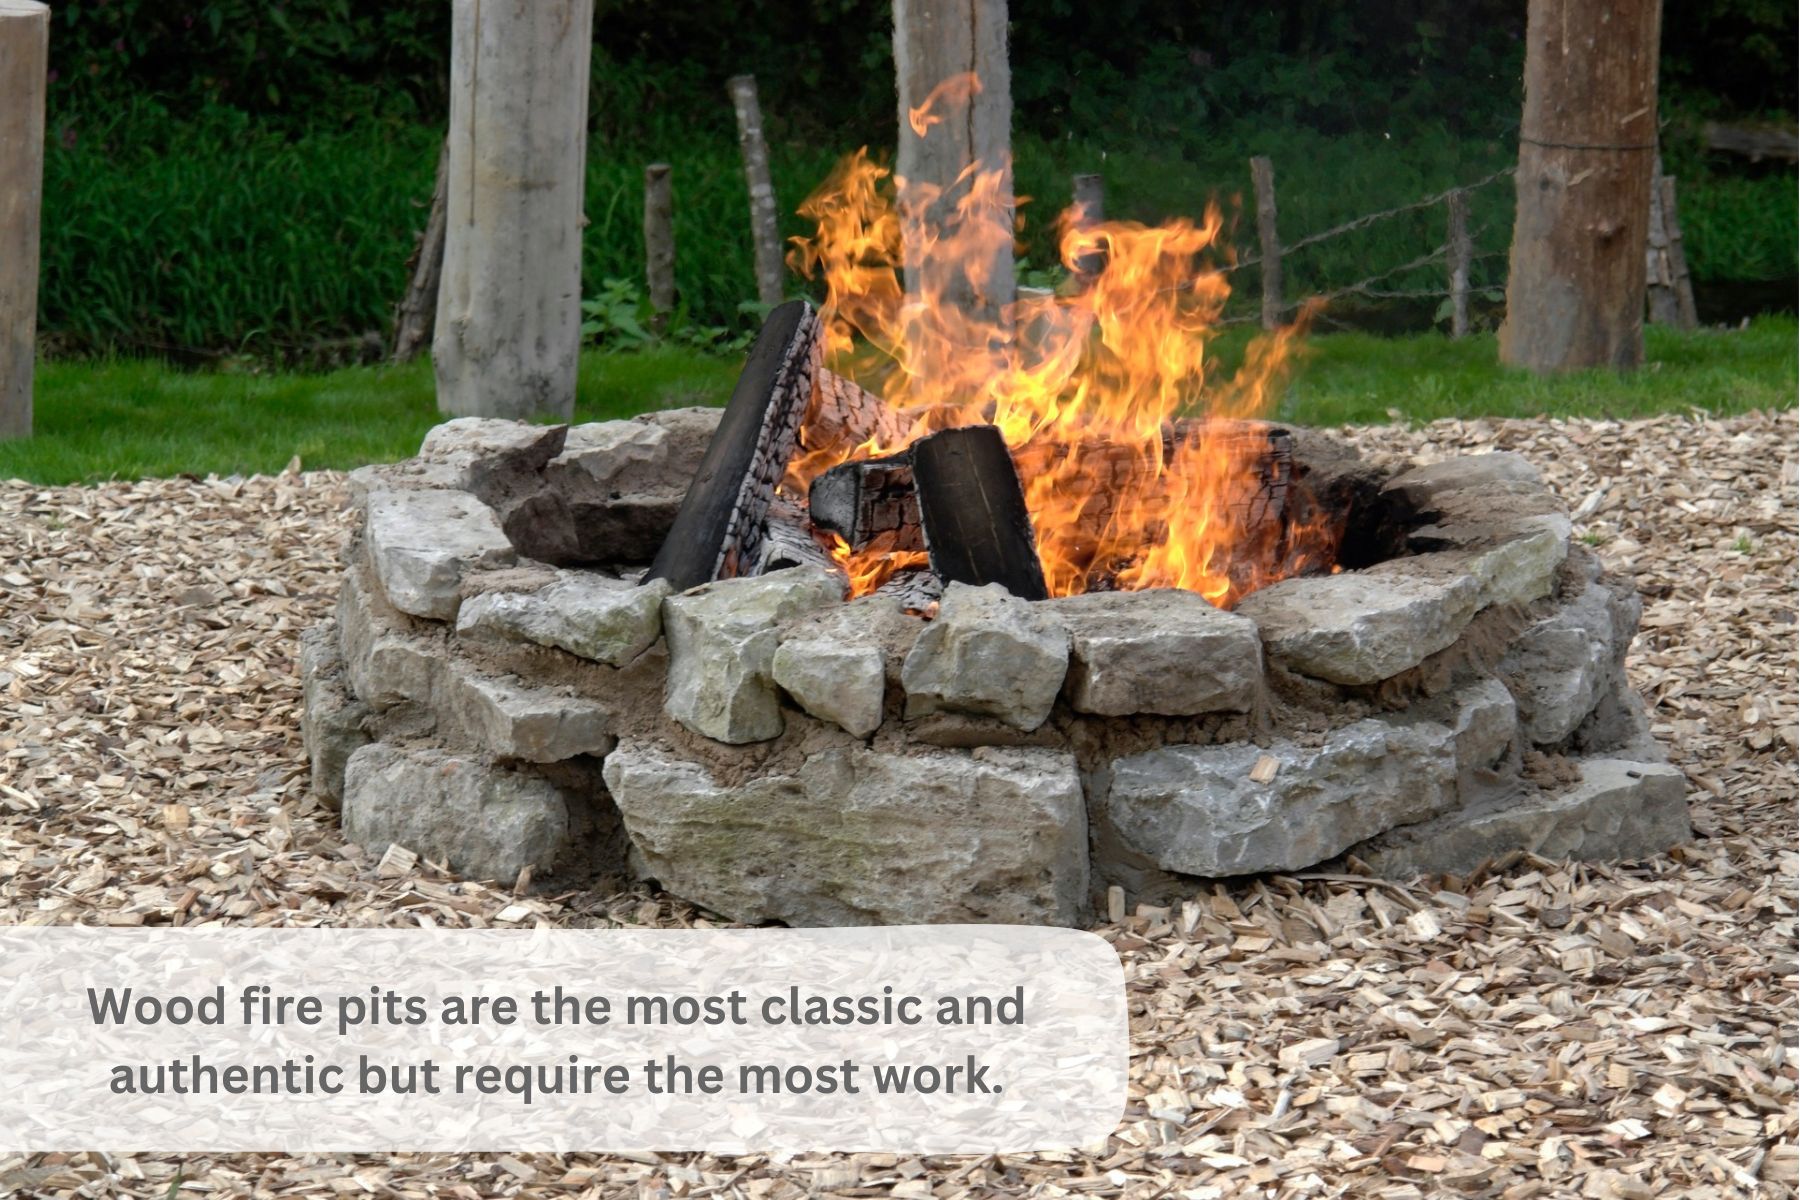 wood fire pits are classic